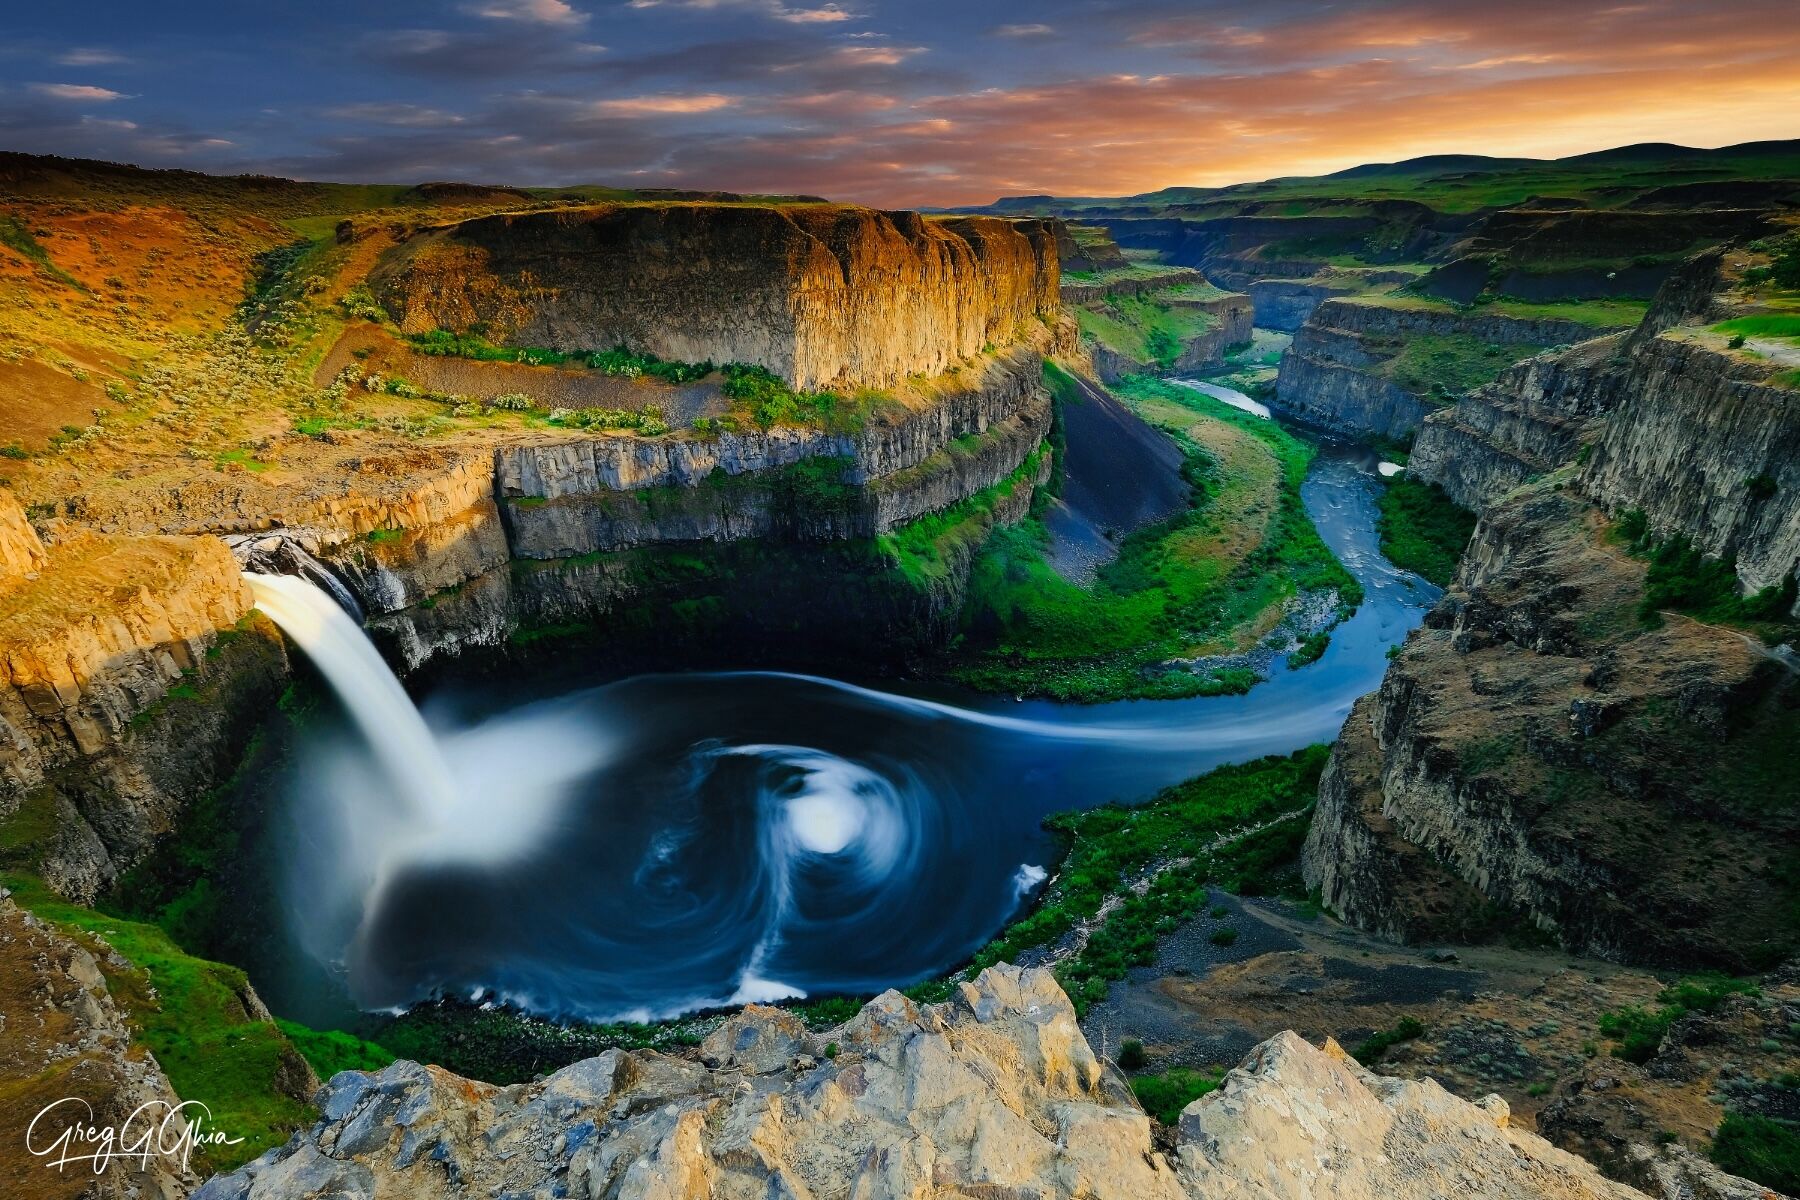 Waterfall tumbles into the swirling pool of water below the jagged cliffs while sunlight bathes the cliffs in light at sunset with pink clouds in the sky.